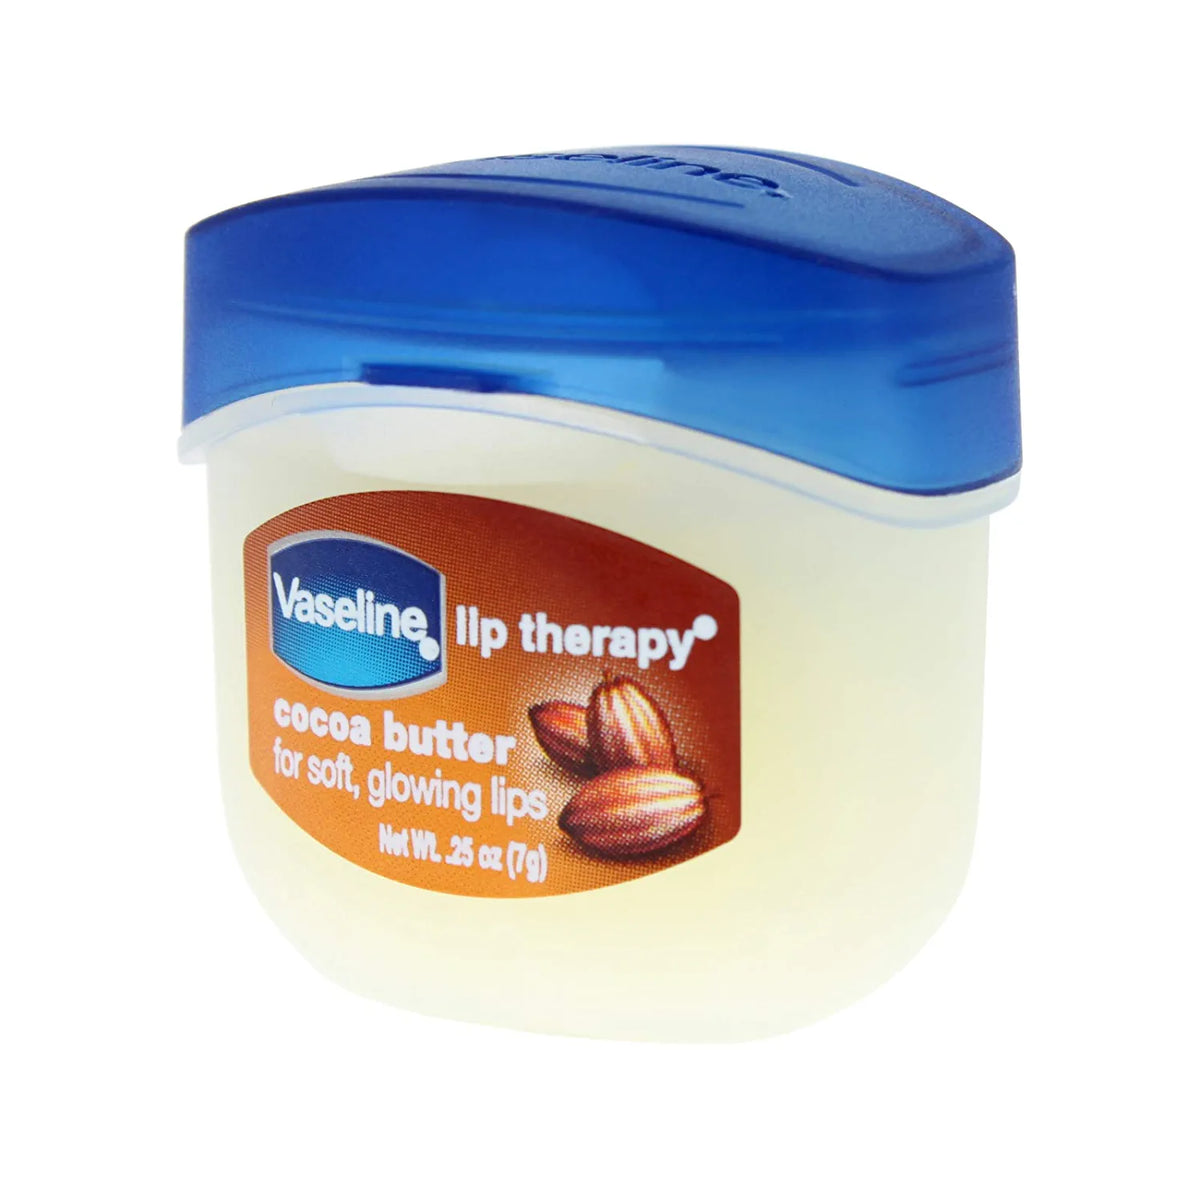 Vaseline - Lip Therapy Cocoa Butter 7g